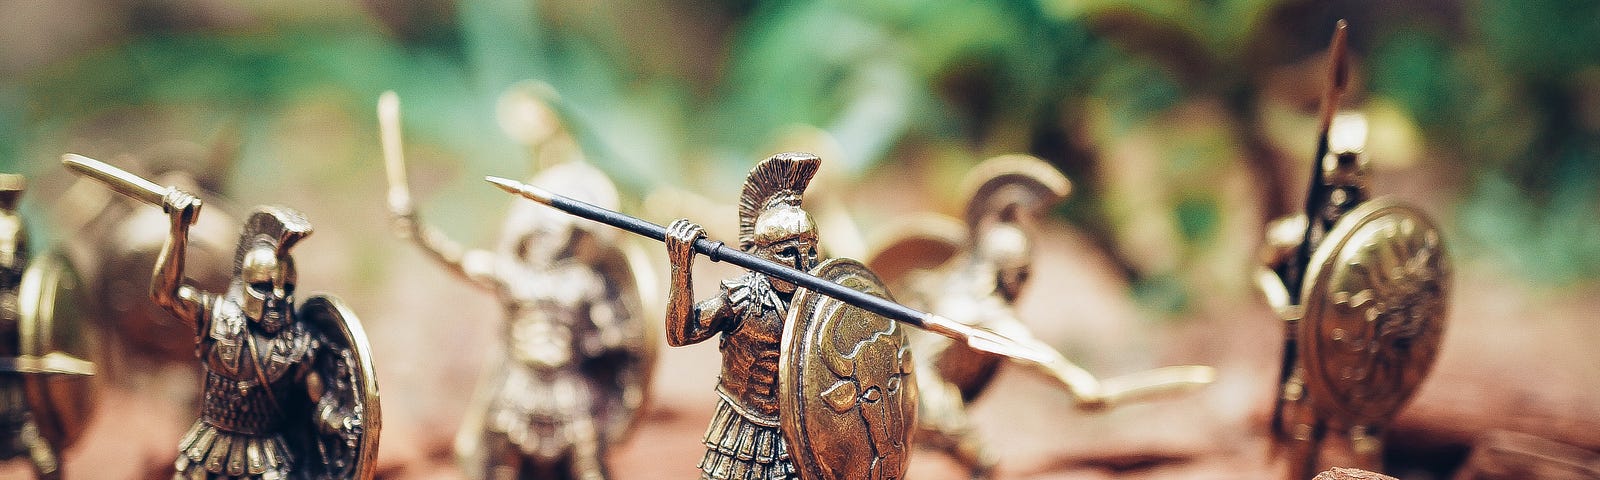 Roman-esque miniature warriors in battle metaphorically displaying the battle for the soul of America.